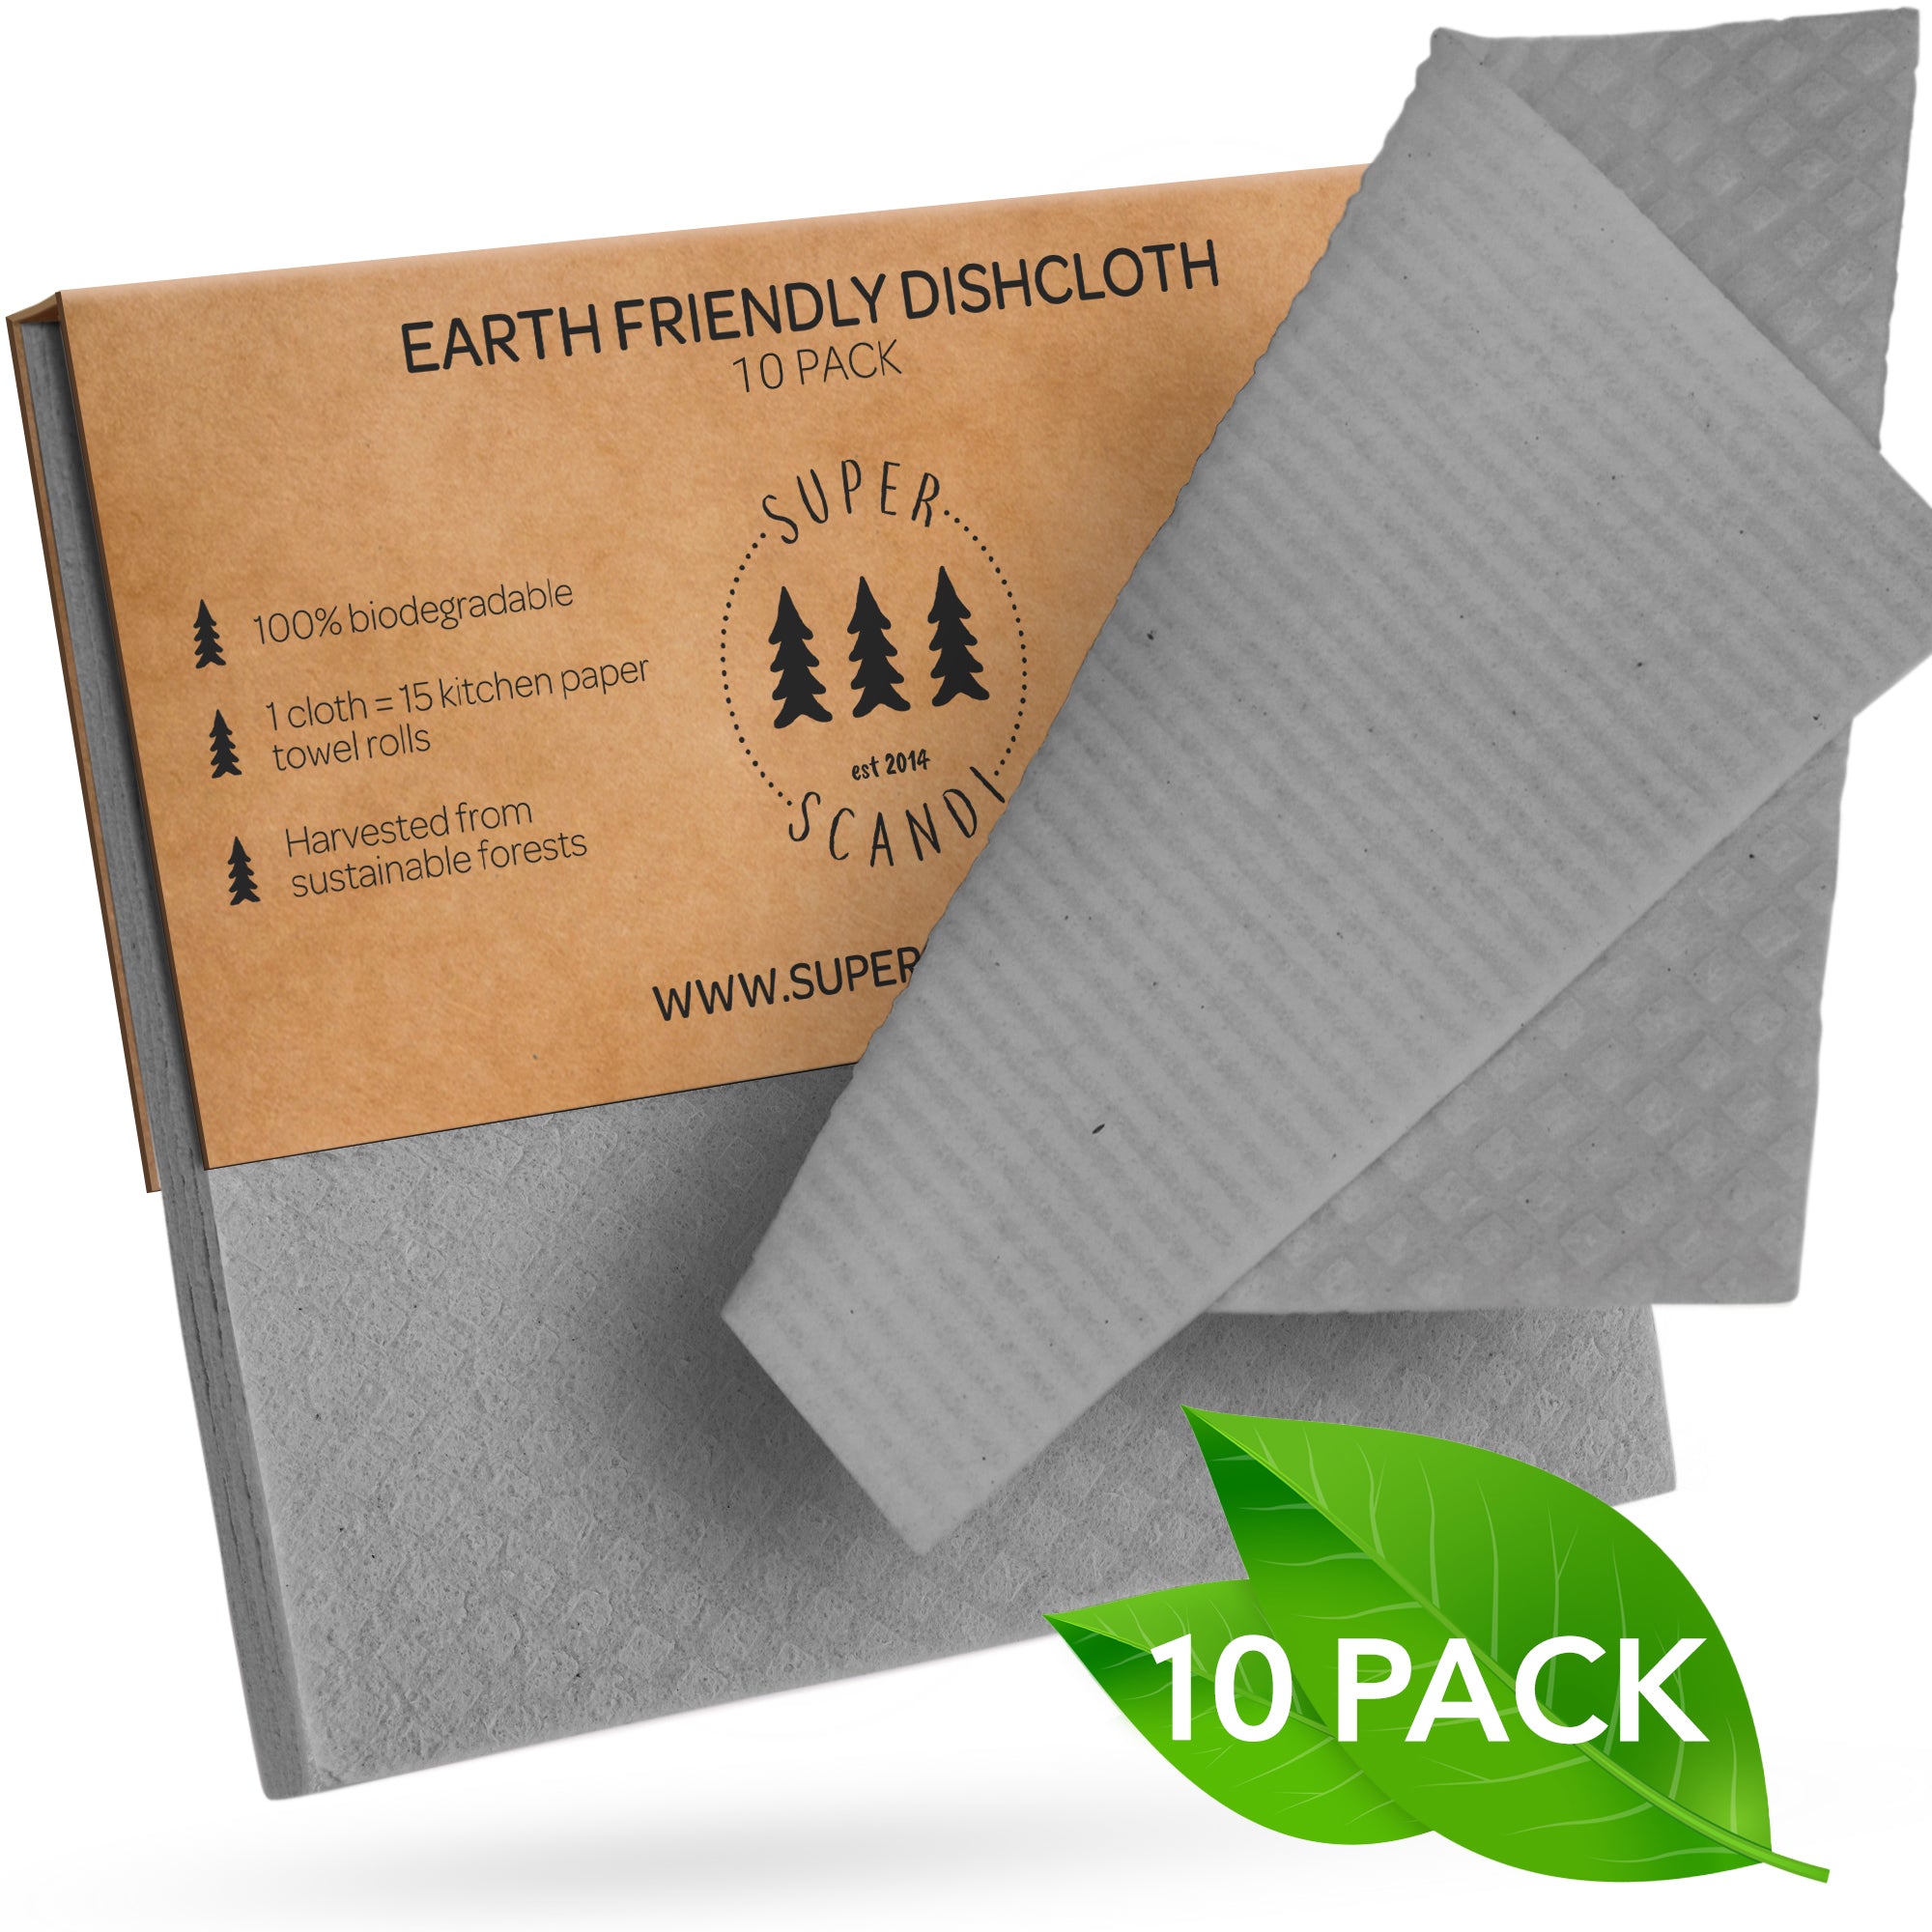 SUPERSCANDI Swedish Dish Clothes 6 Pack of Black Reusable Compostable  Kitchen Cloth Made in Sweden Cellulose Sponge Dish Cloths for Washing Dishes